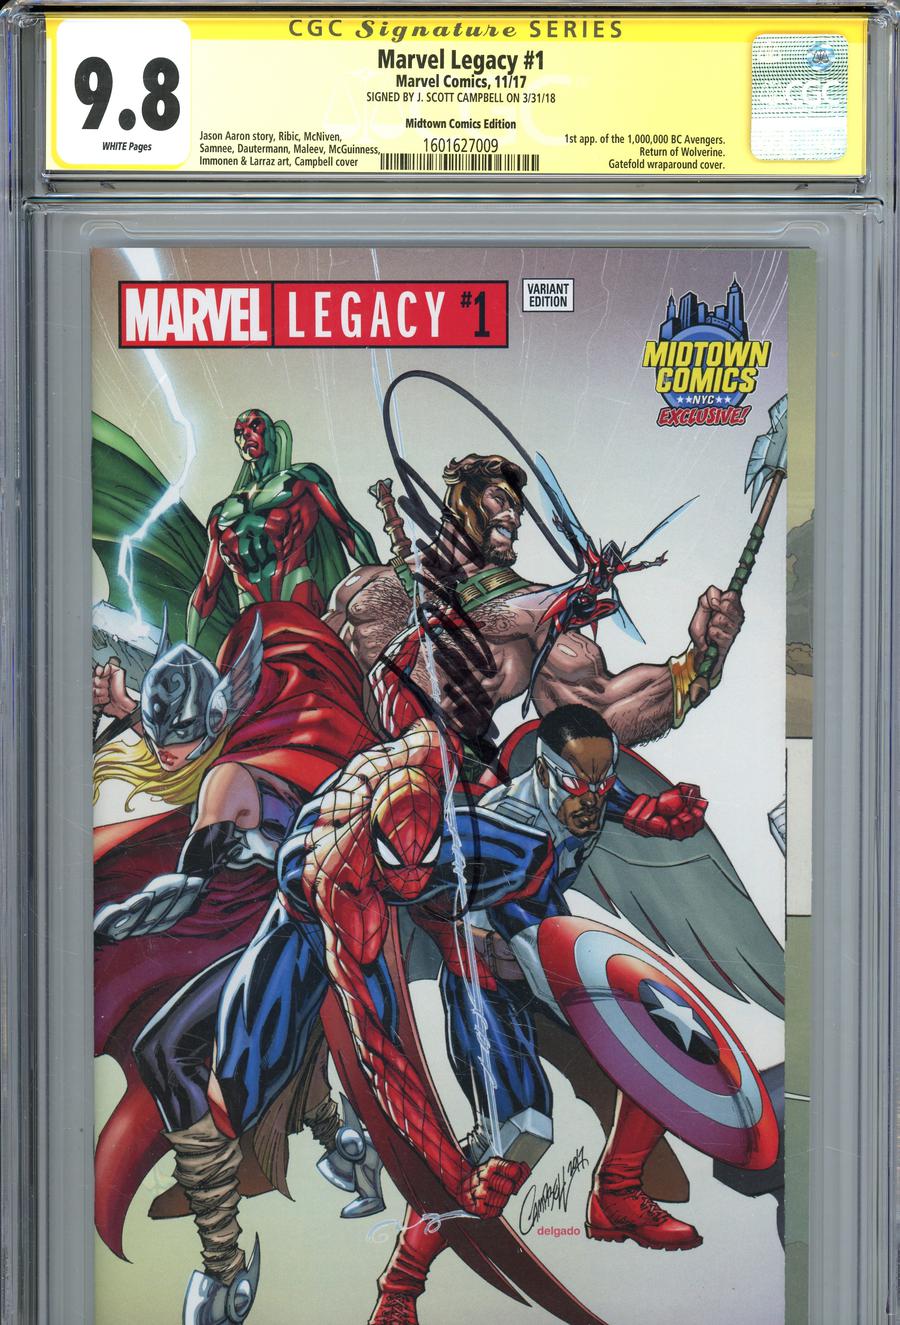 Marvel Legacy #1  Midtown Exclusive J Scott Campbell Gatefold Wraparound Variant Cover Signed By J Scott Campbell CGC 9.8